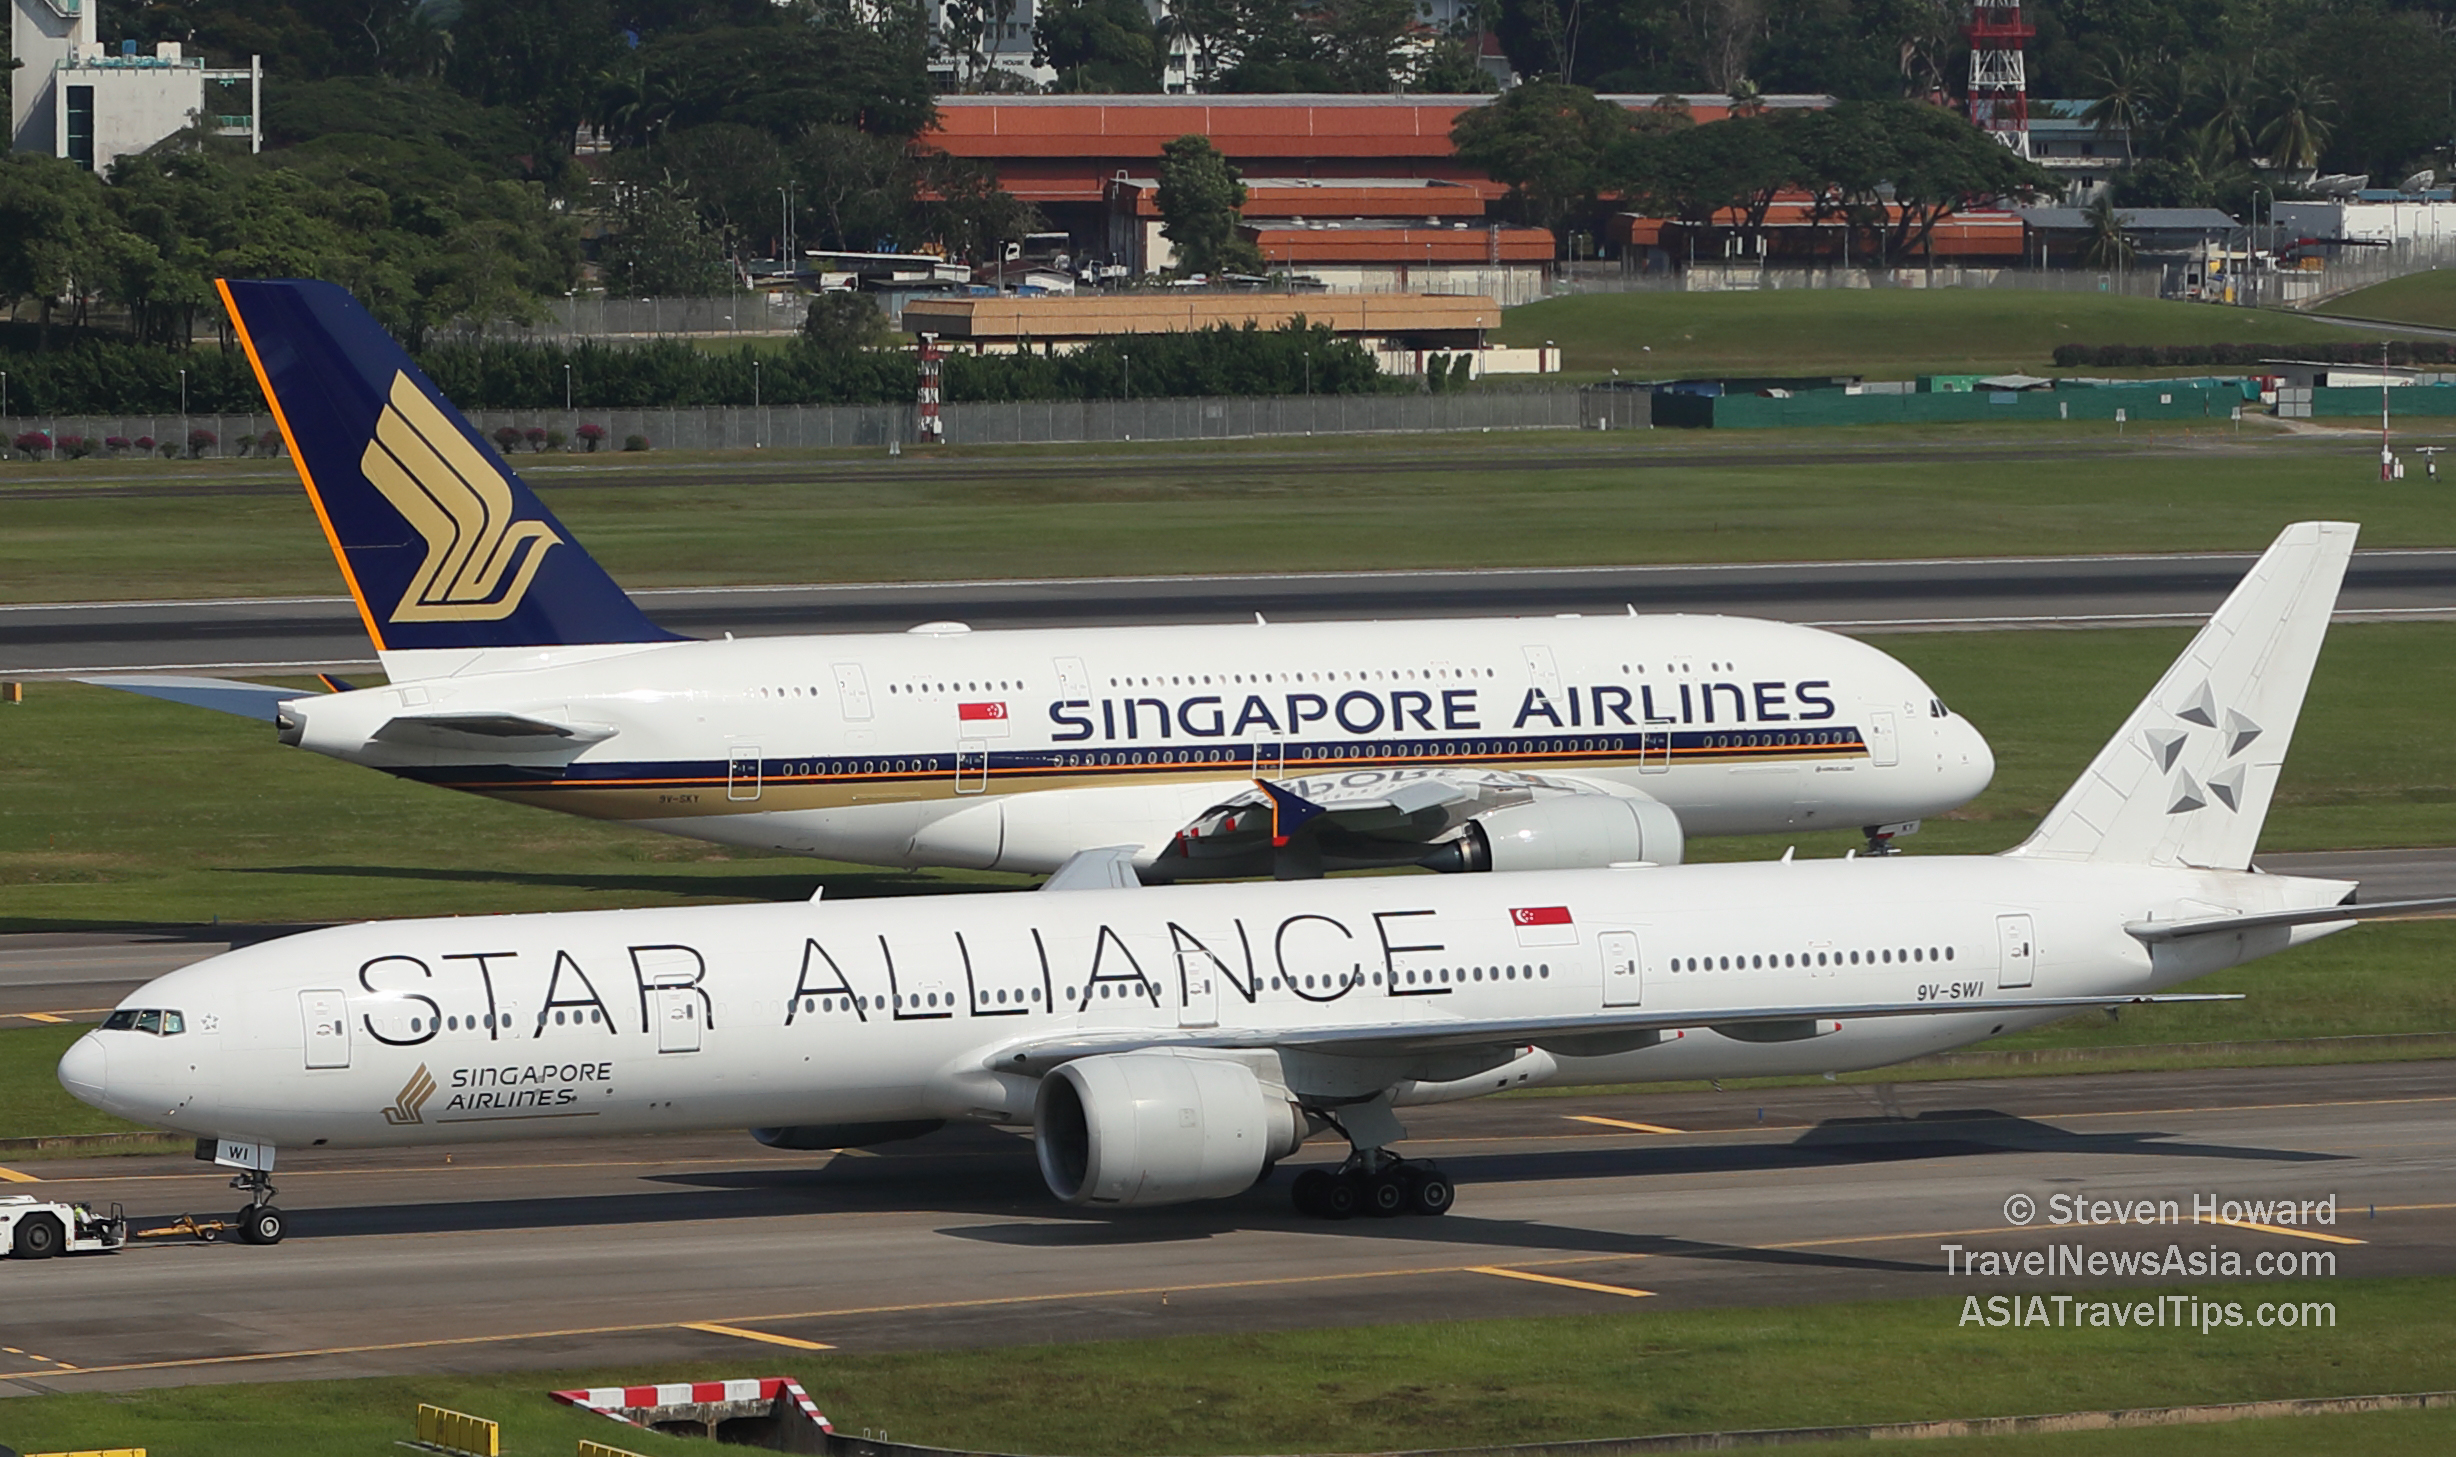 Singapore Airlines' aircraft at Changi Airport. Picture by Steven Howard of TravelNewsAsia.com Click to enlarge.